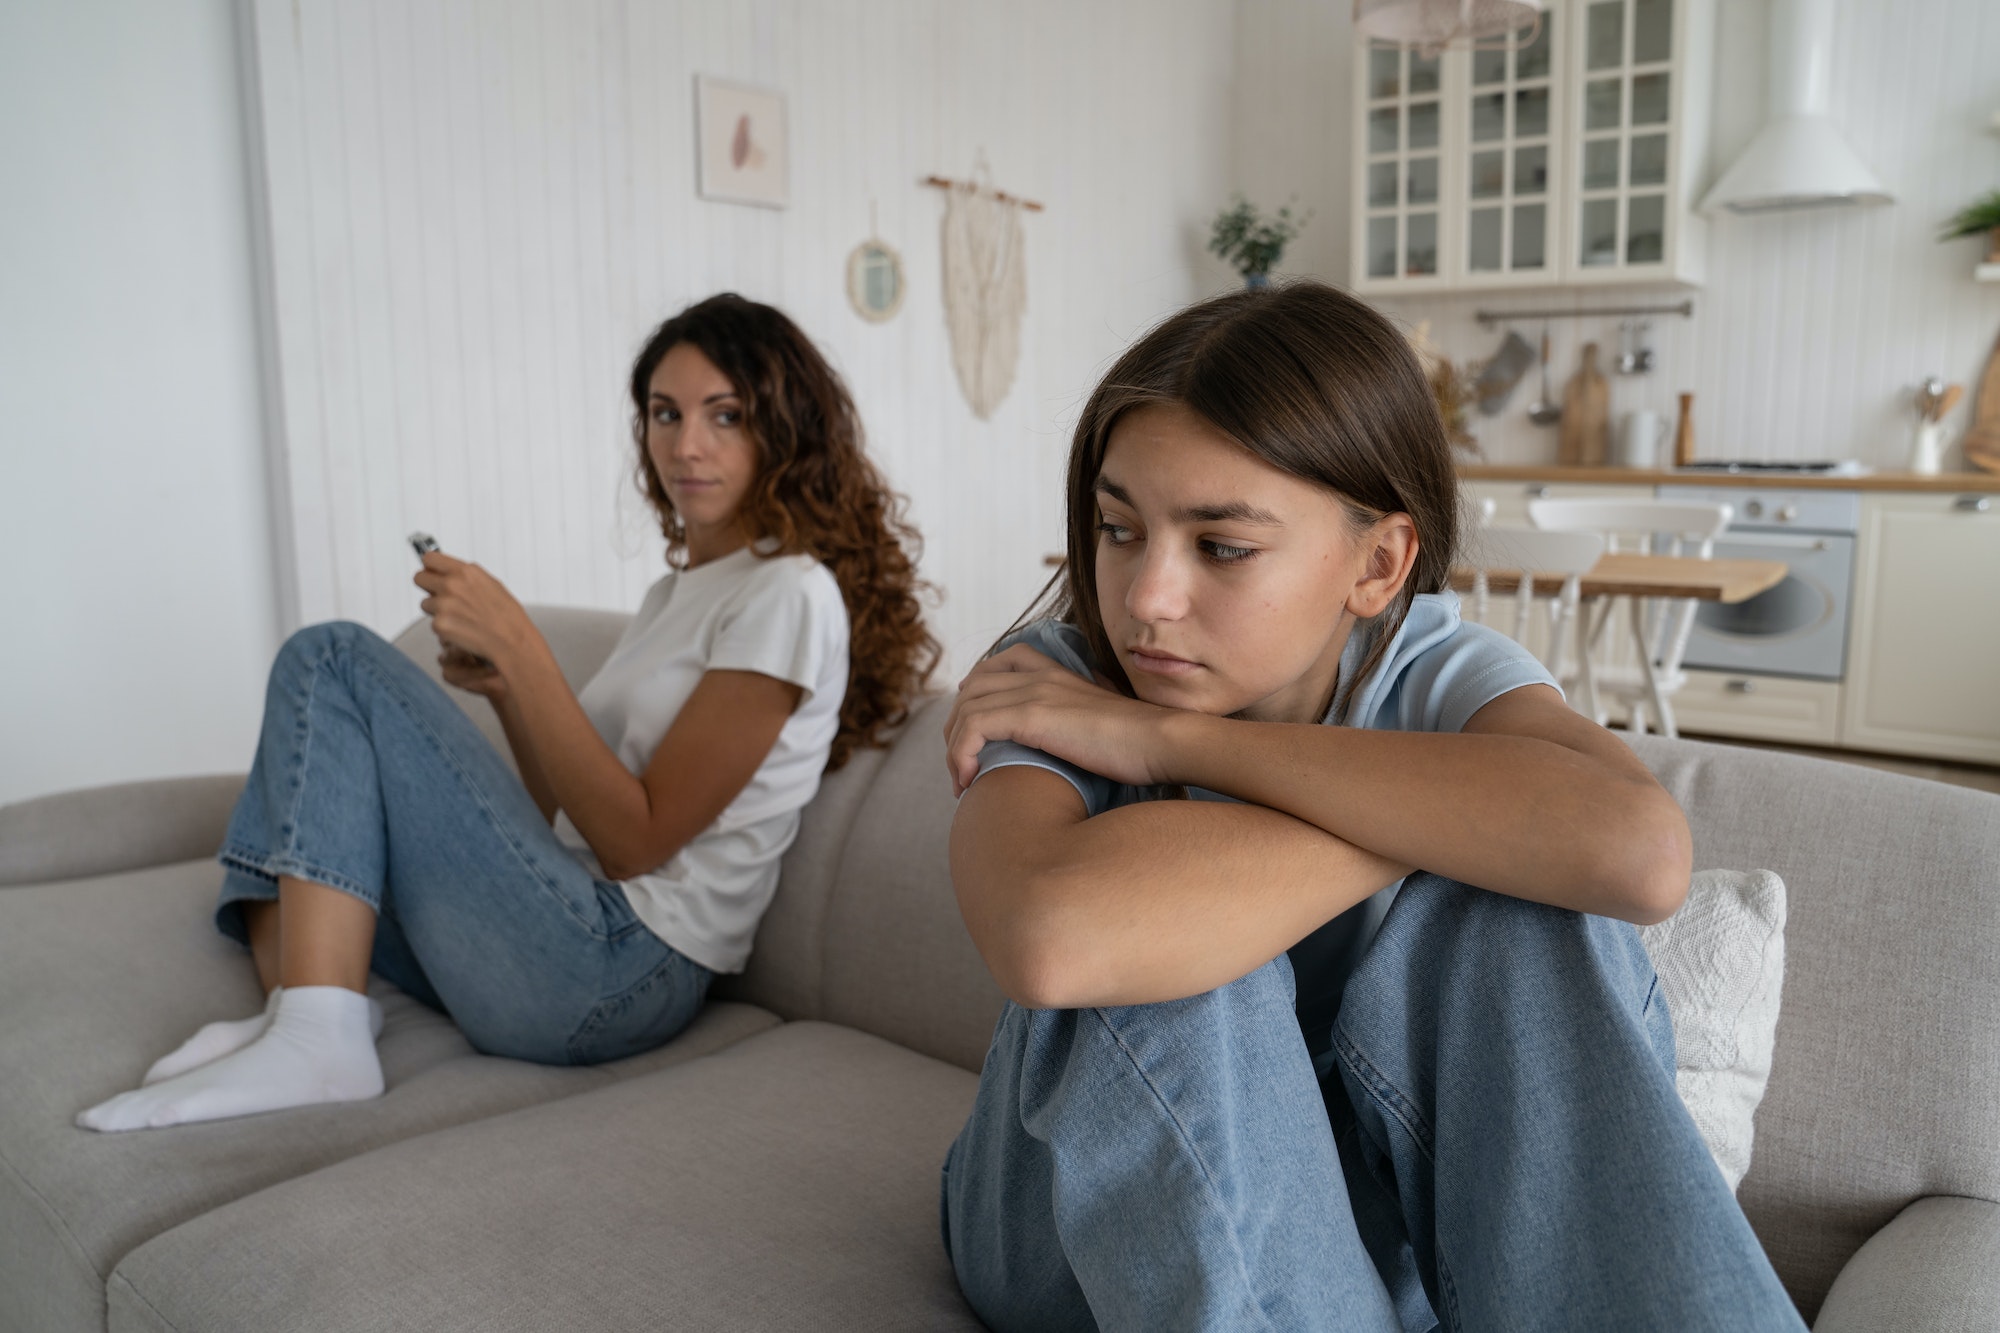 Offended teen girl feeling sad after argument with parent, sitting separately with mother on sofa